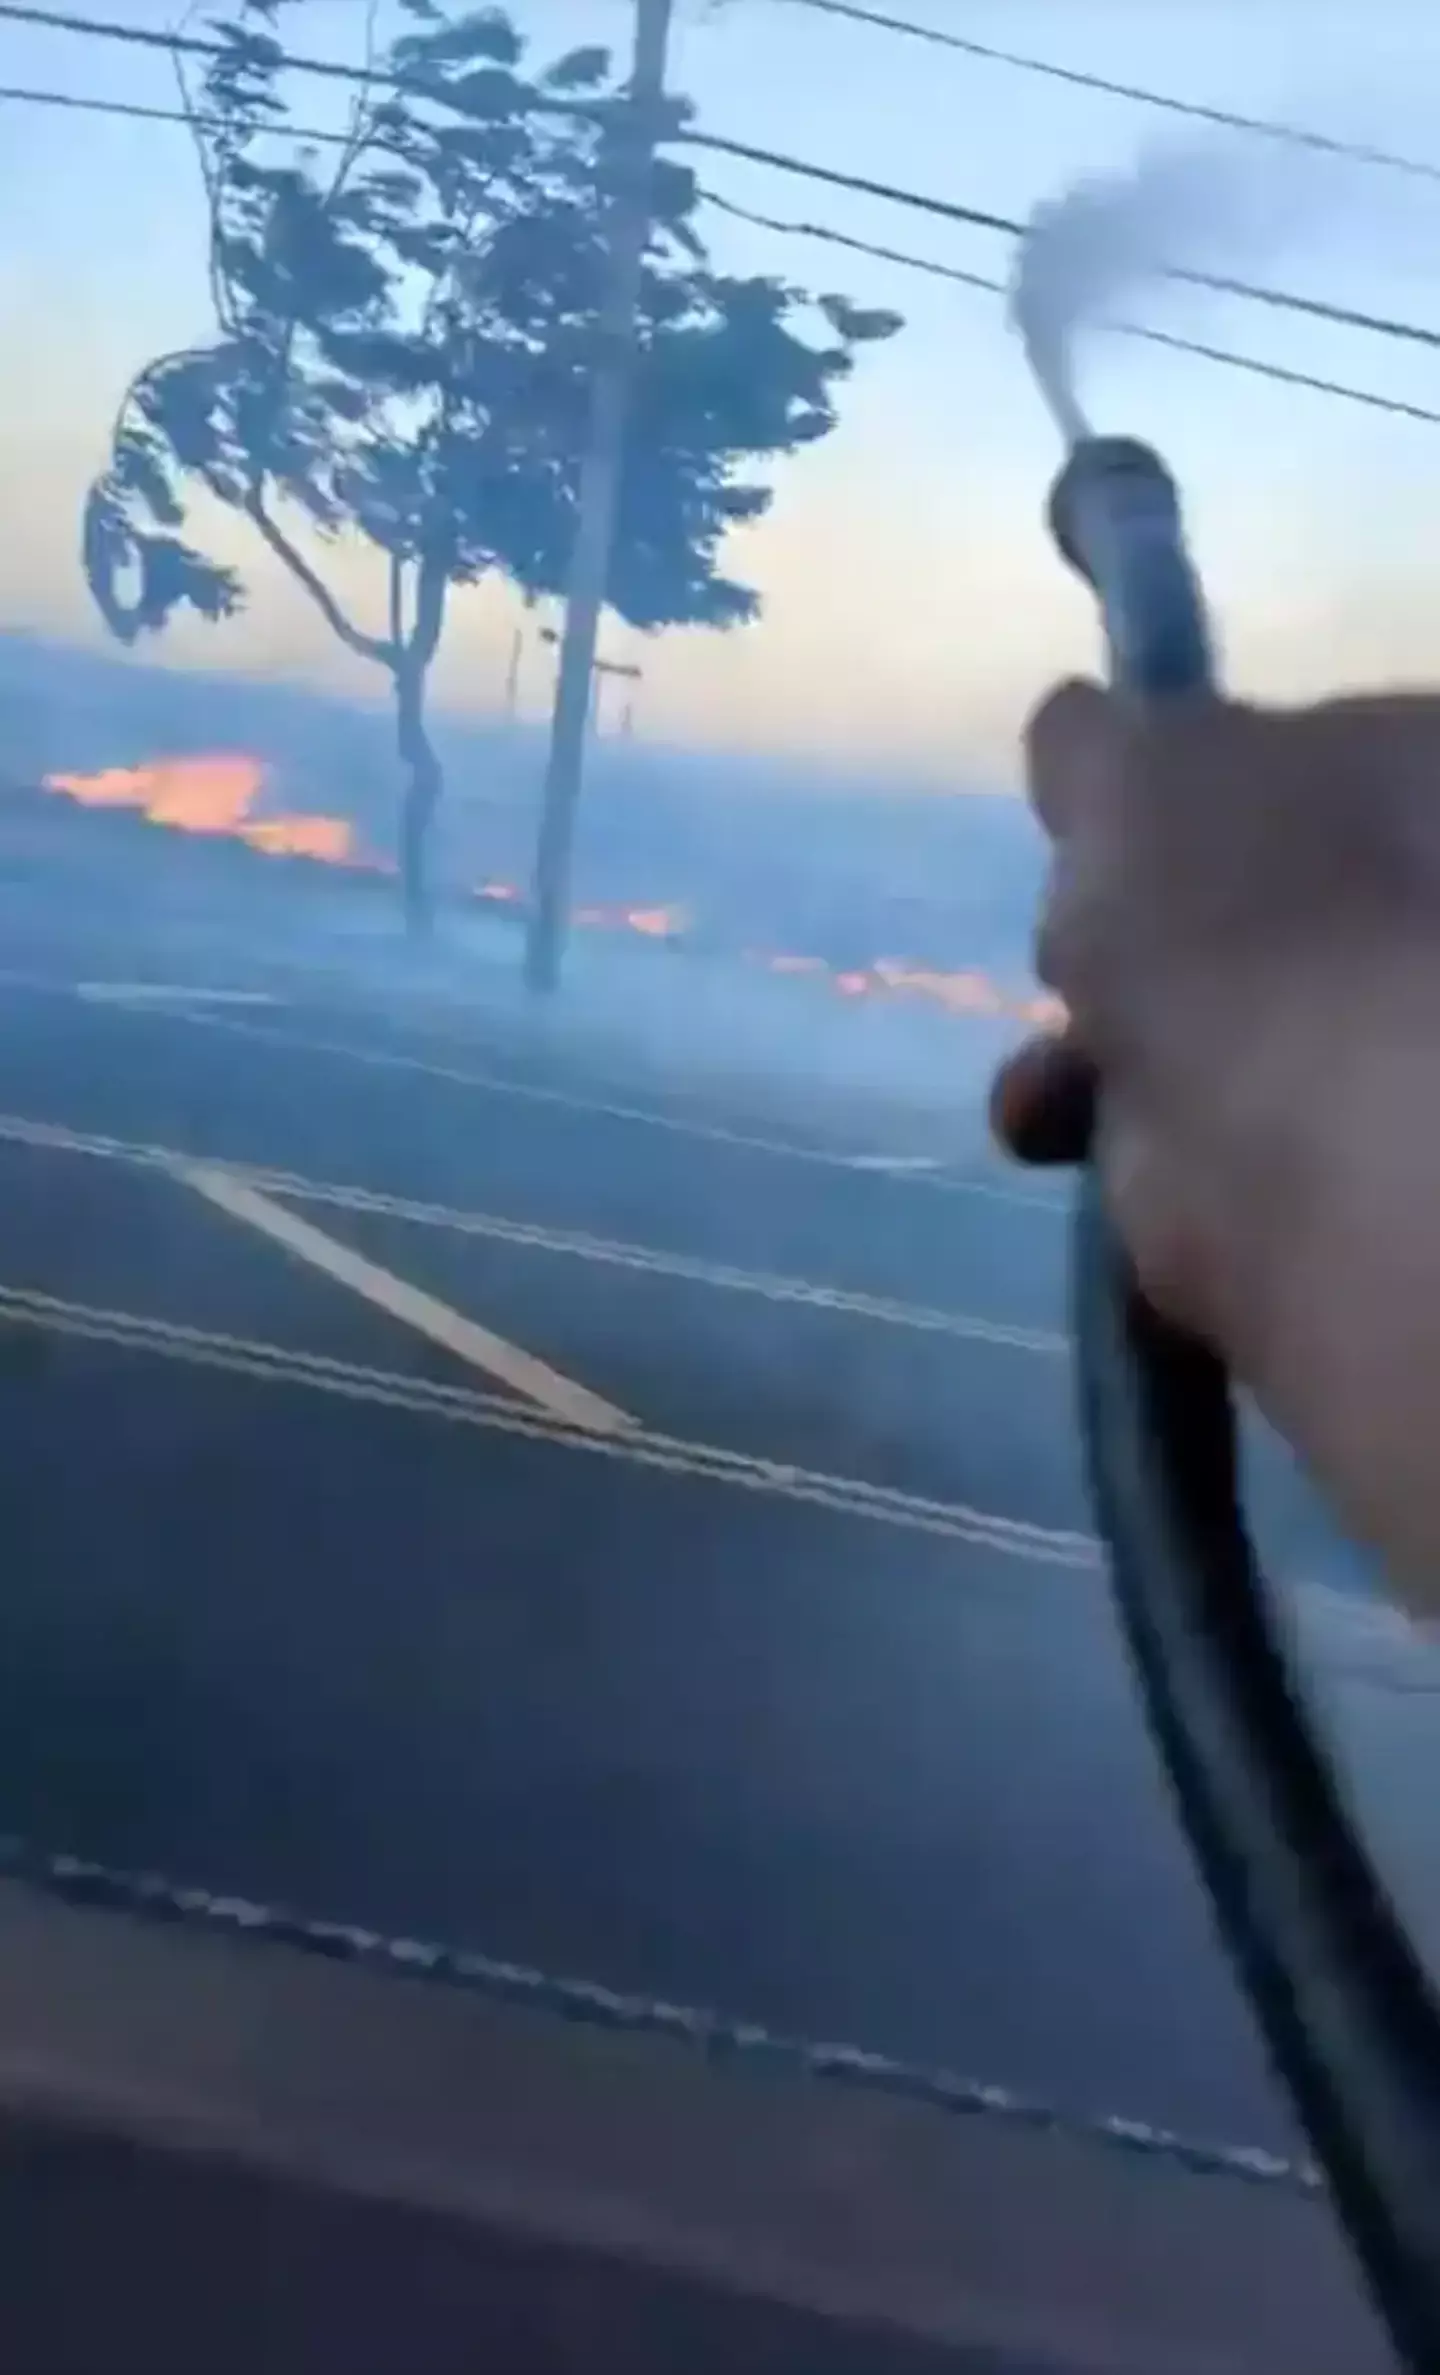 Footage taken by a local man on 8 August shows him fighting the fire and warning people of downed power lines.